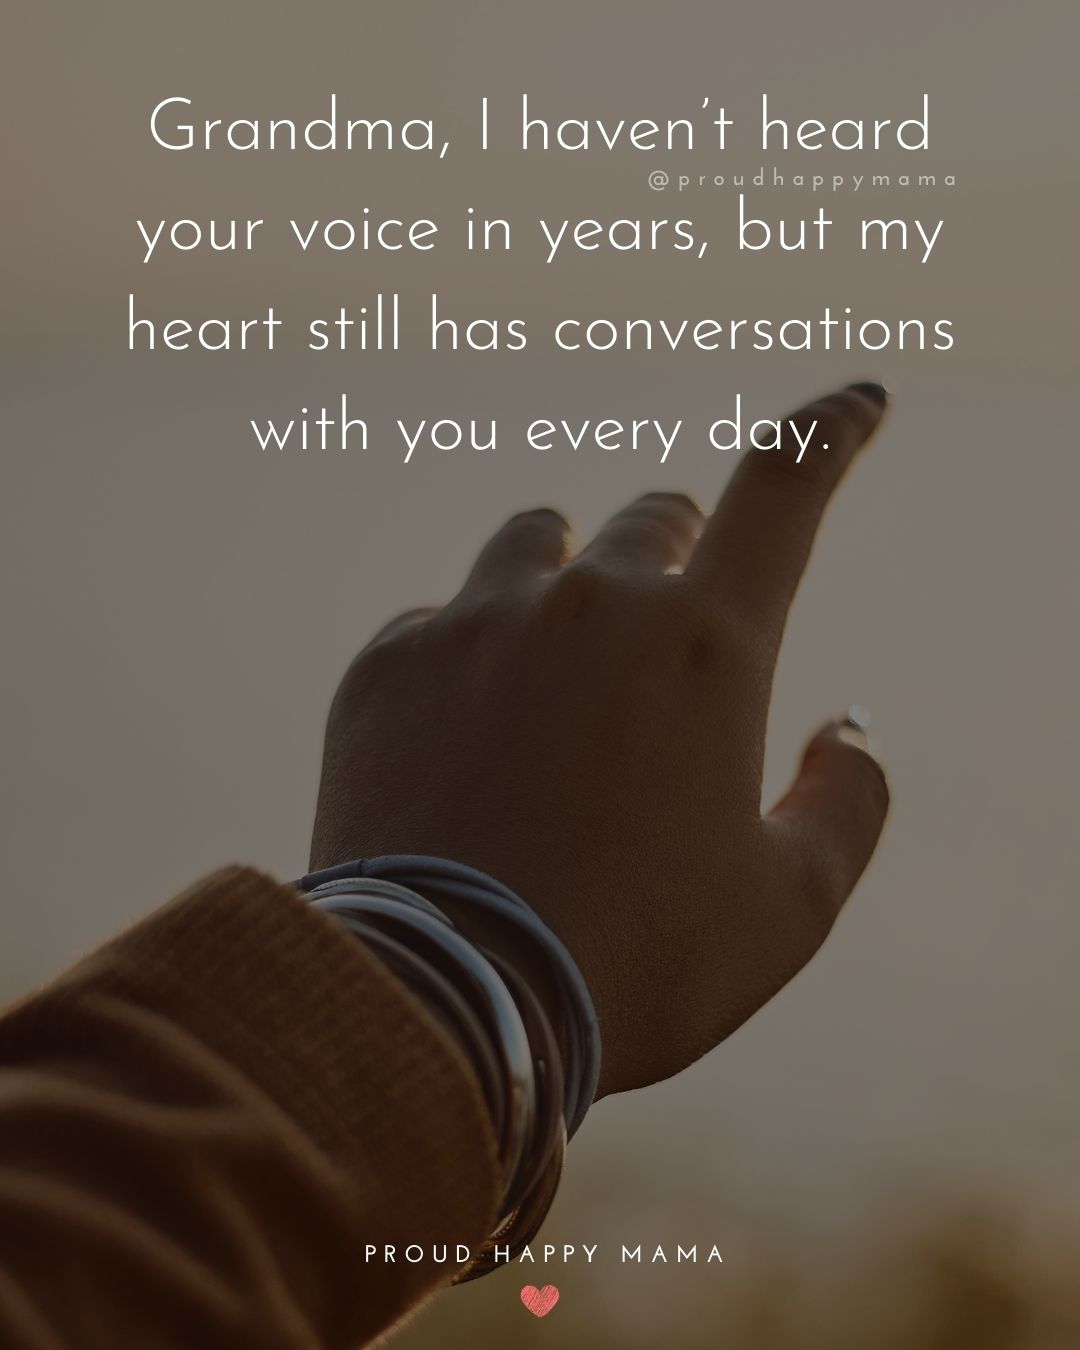 Missing Grandma Quotes - Grandma, I haven’t heard your voice in years, but my heart still has conversations with you every day.